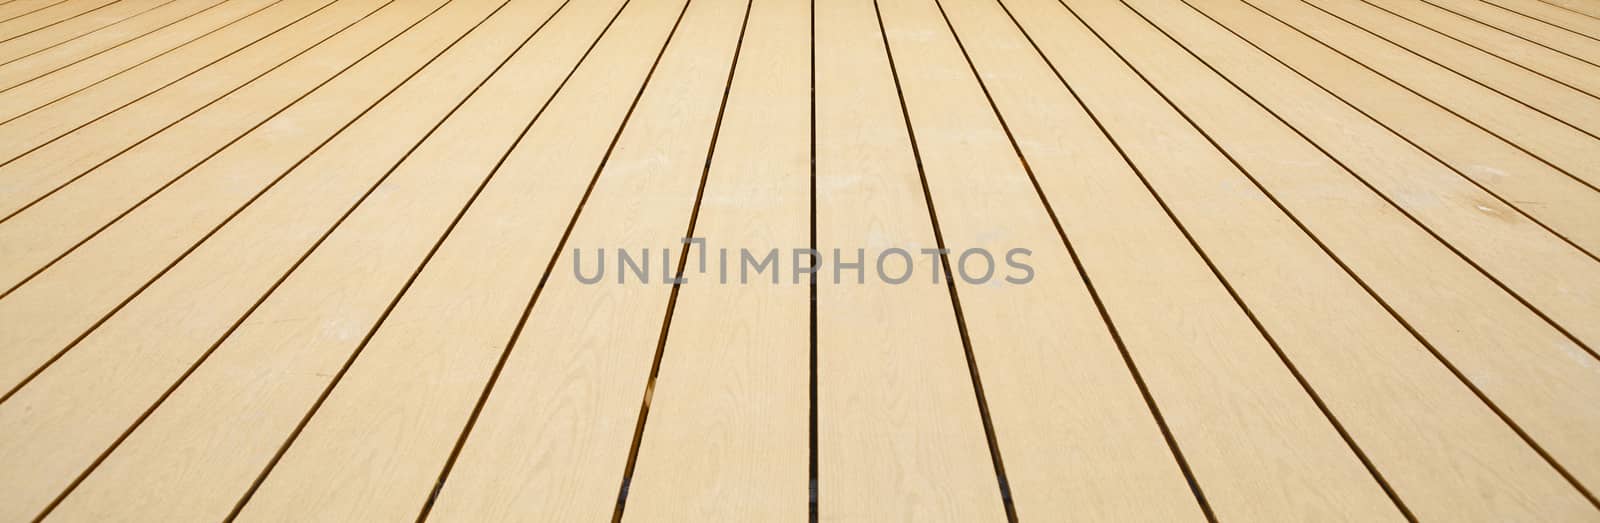 Wooden plank pattern texture background. by jee1999